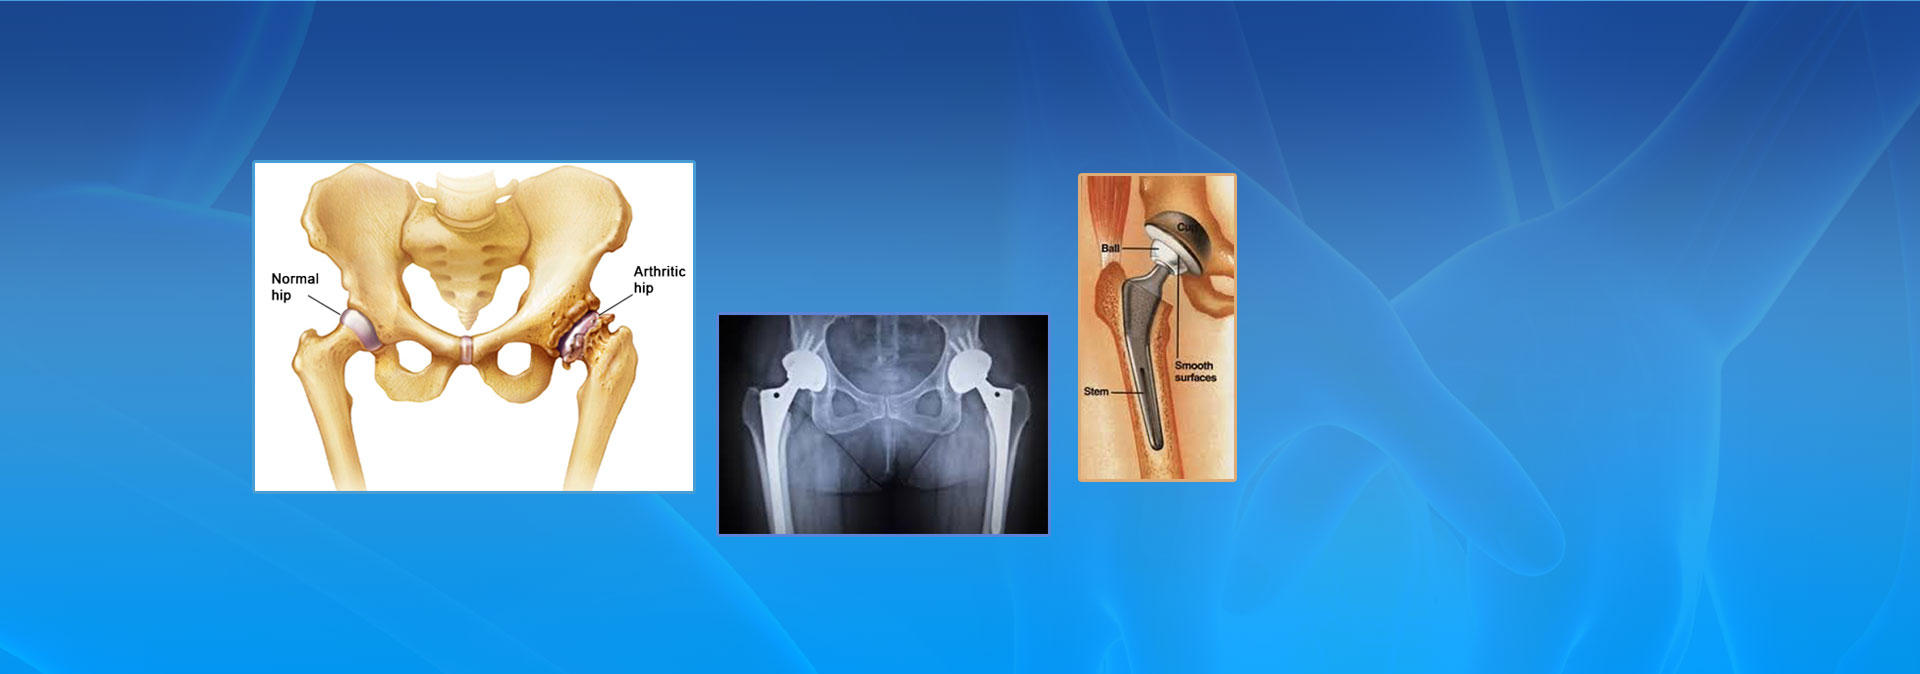 total hip replacement image